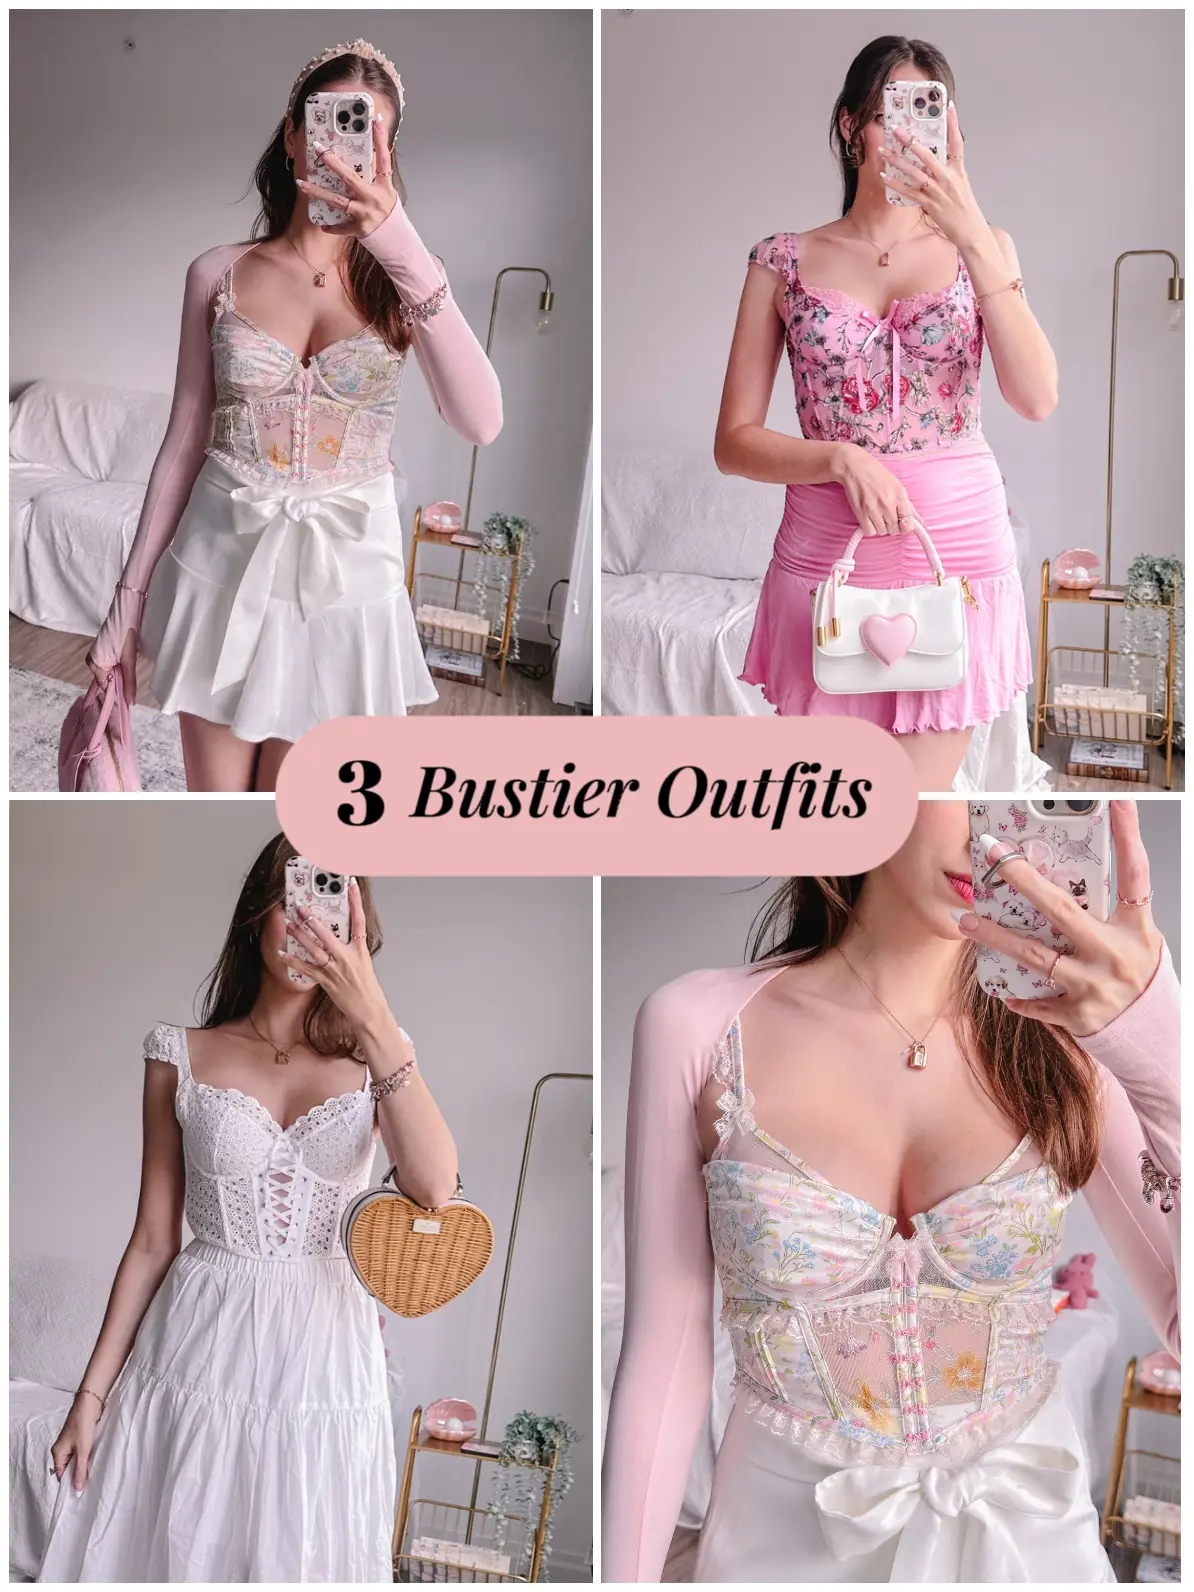 Apperloth A Floral Embroidery Mesh Bustier Corset Top